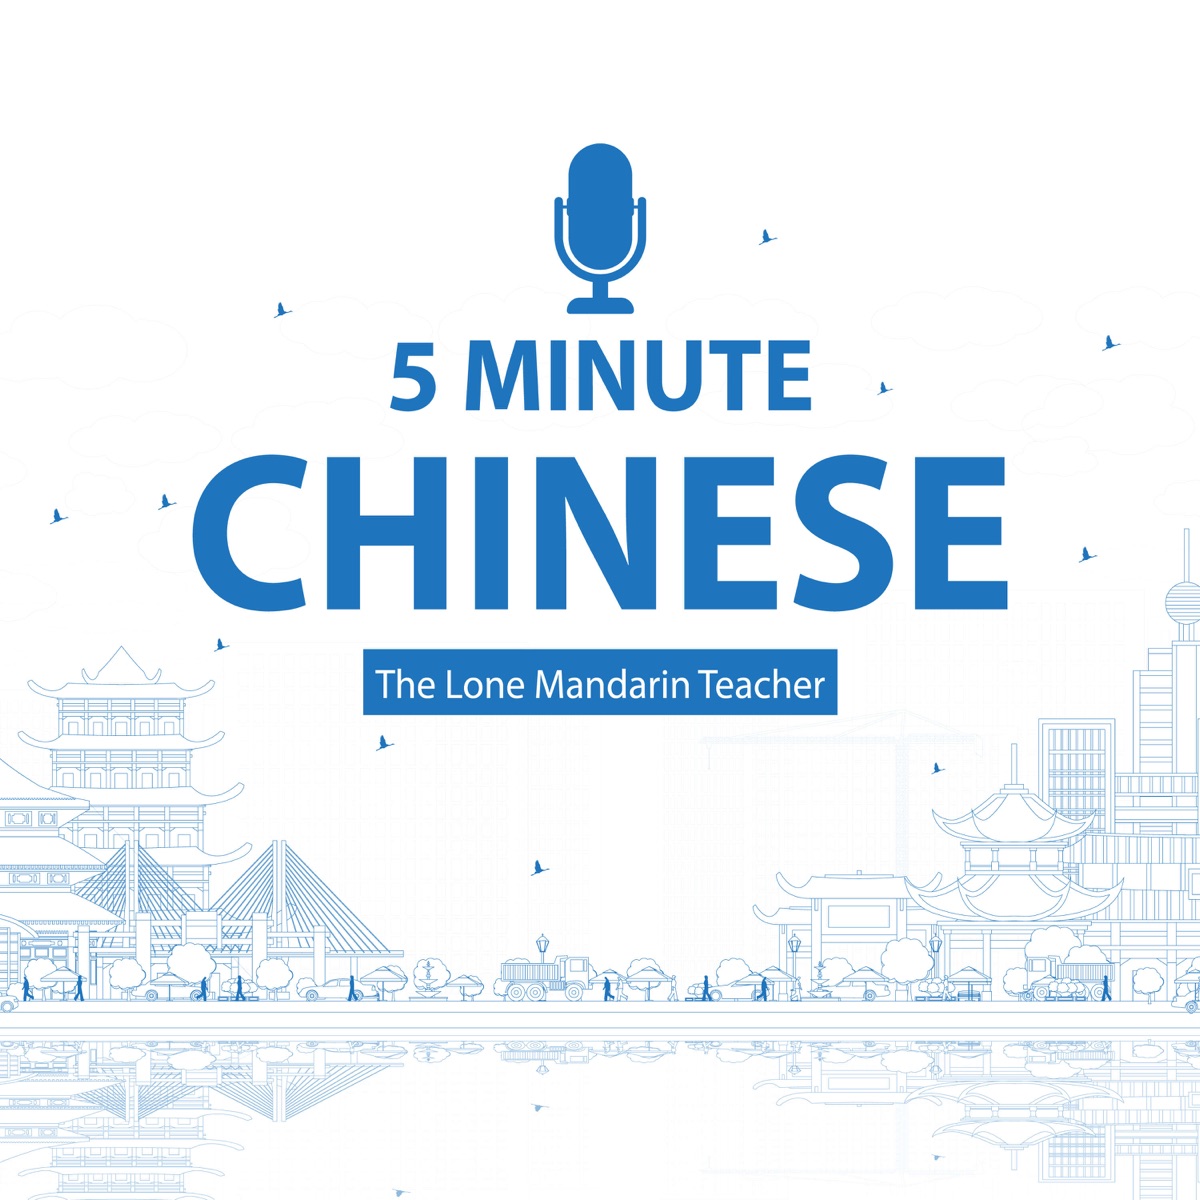 5 Minute Chinese 五分钟中文– Podcast – Podtail